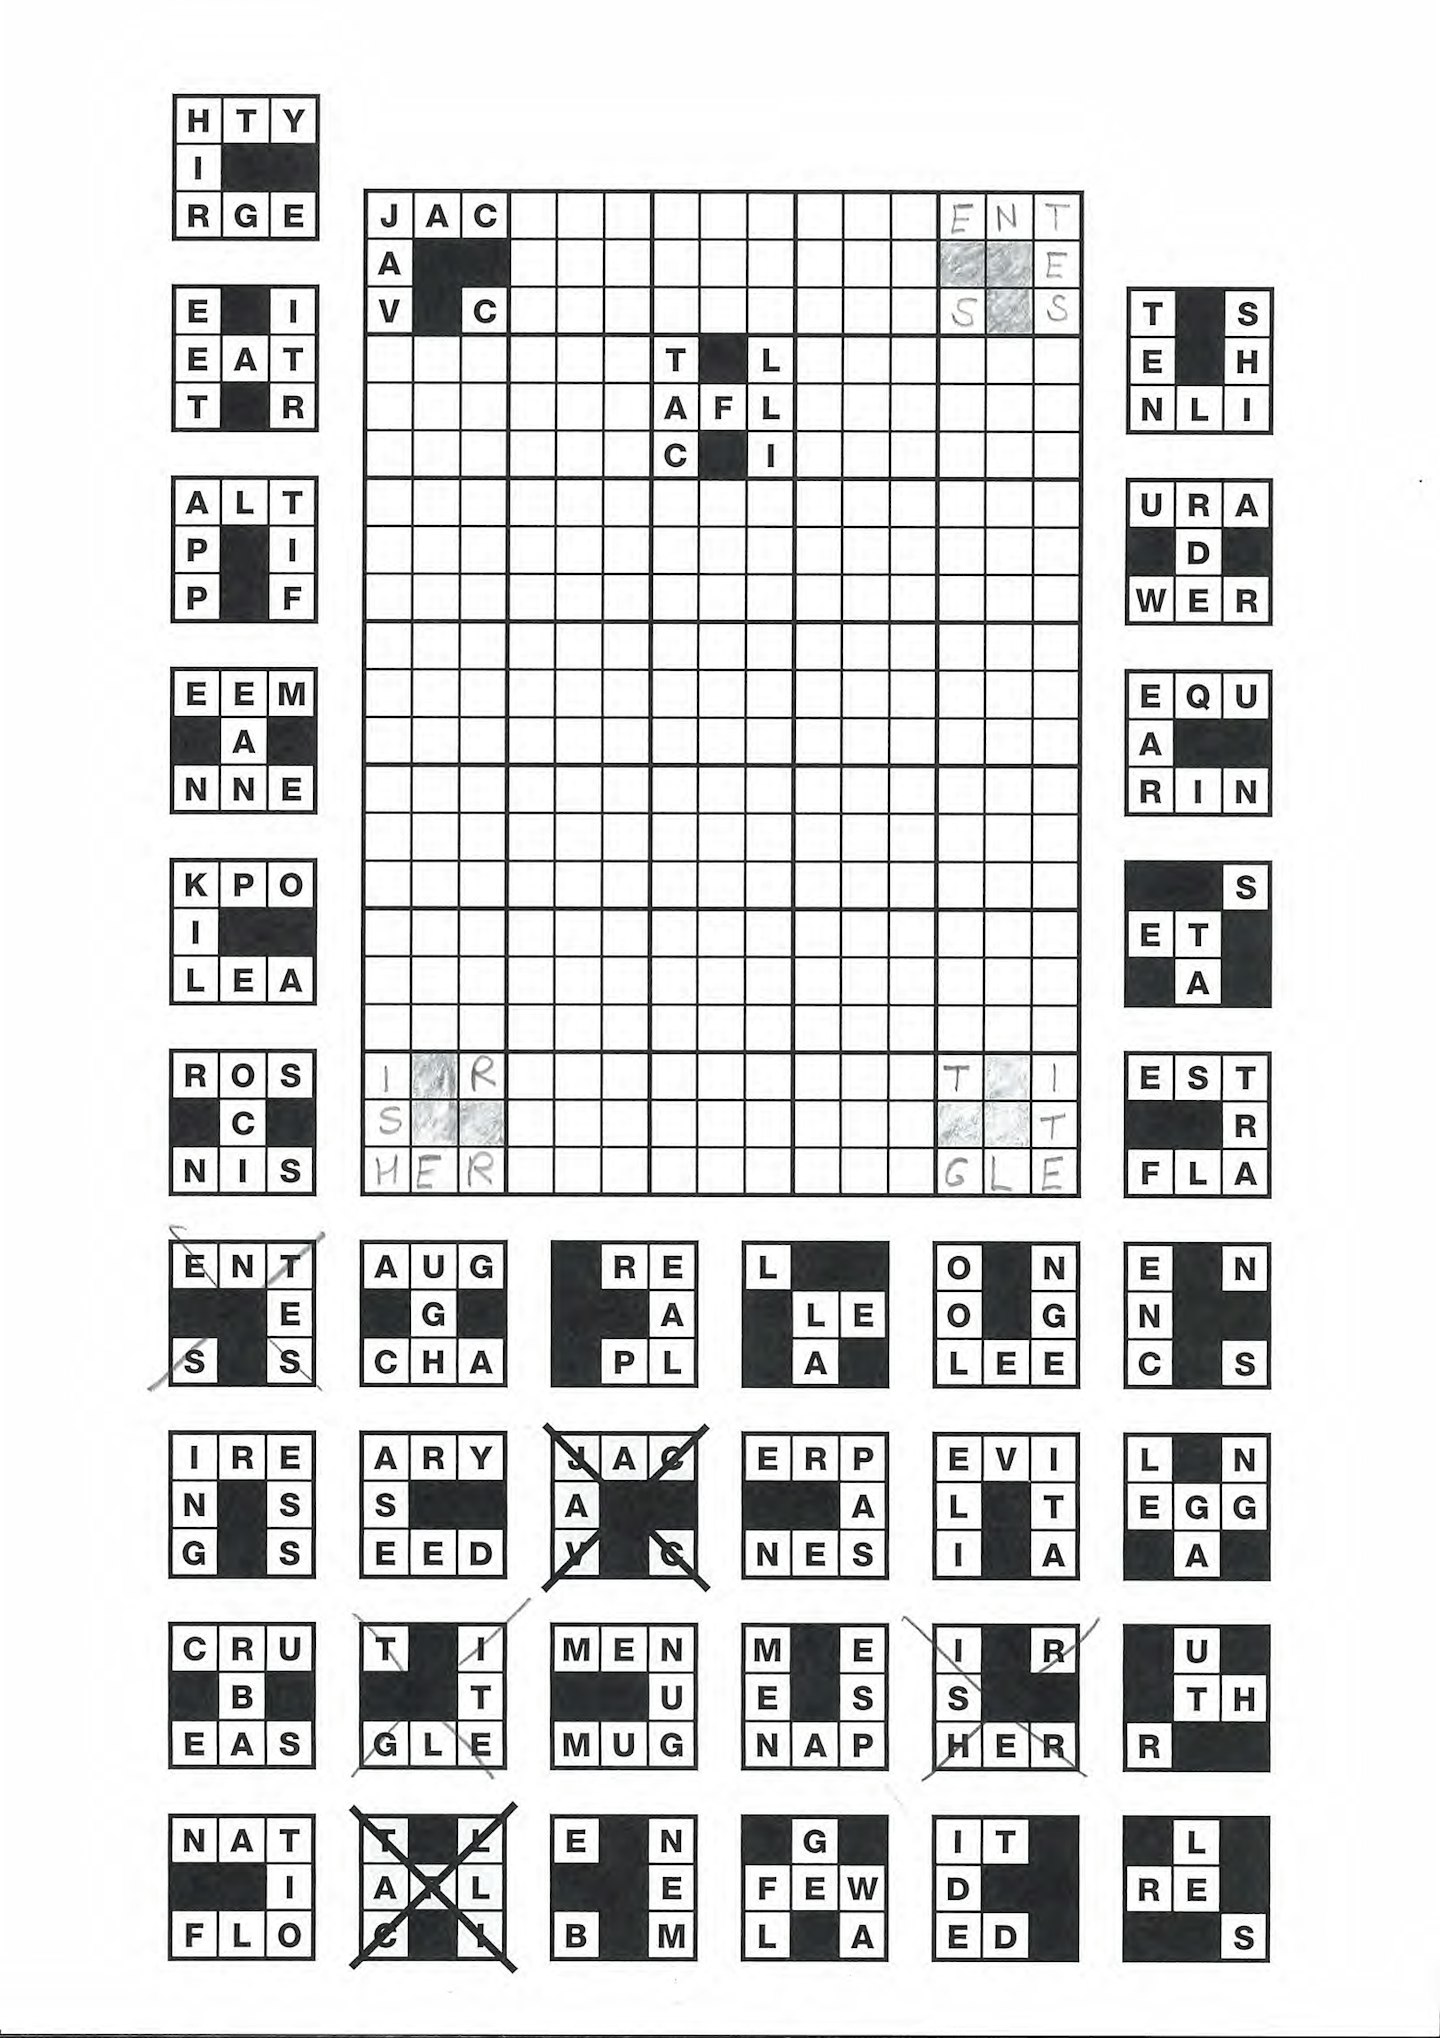 Bits and Pieces example grid 1